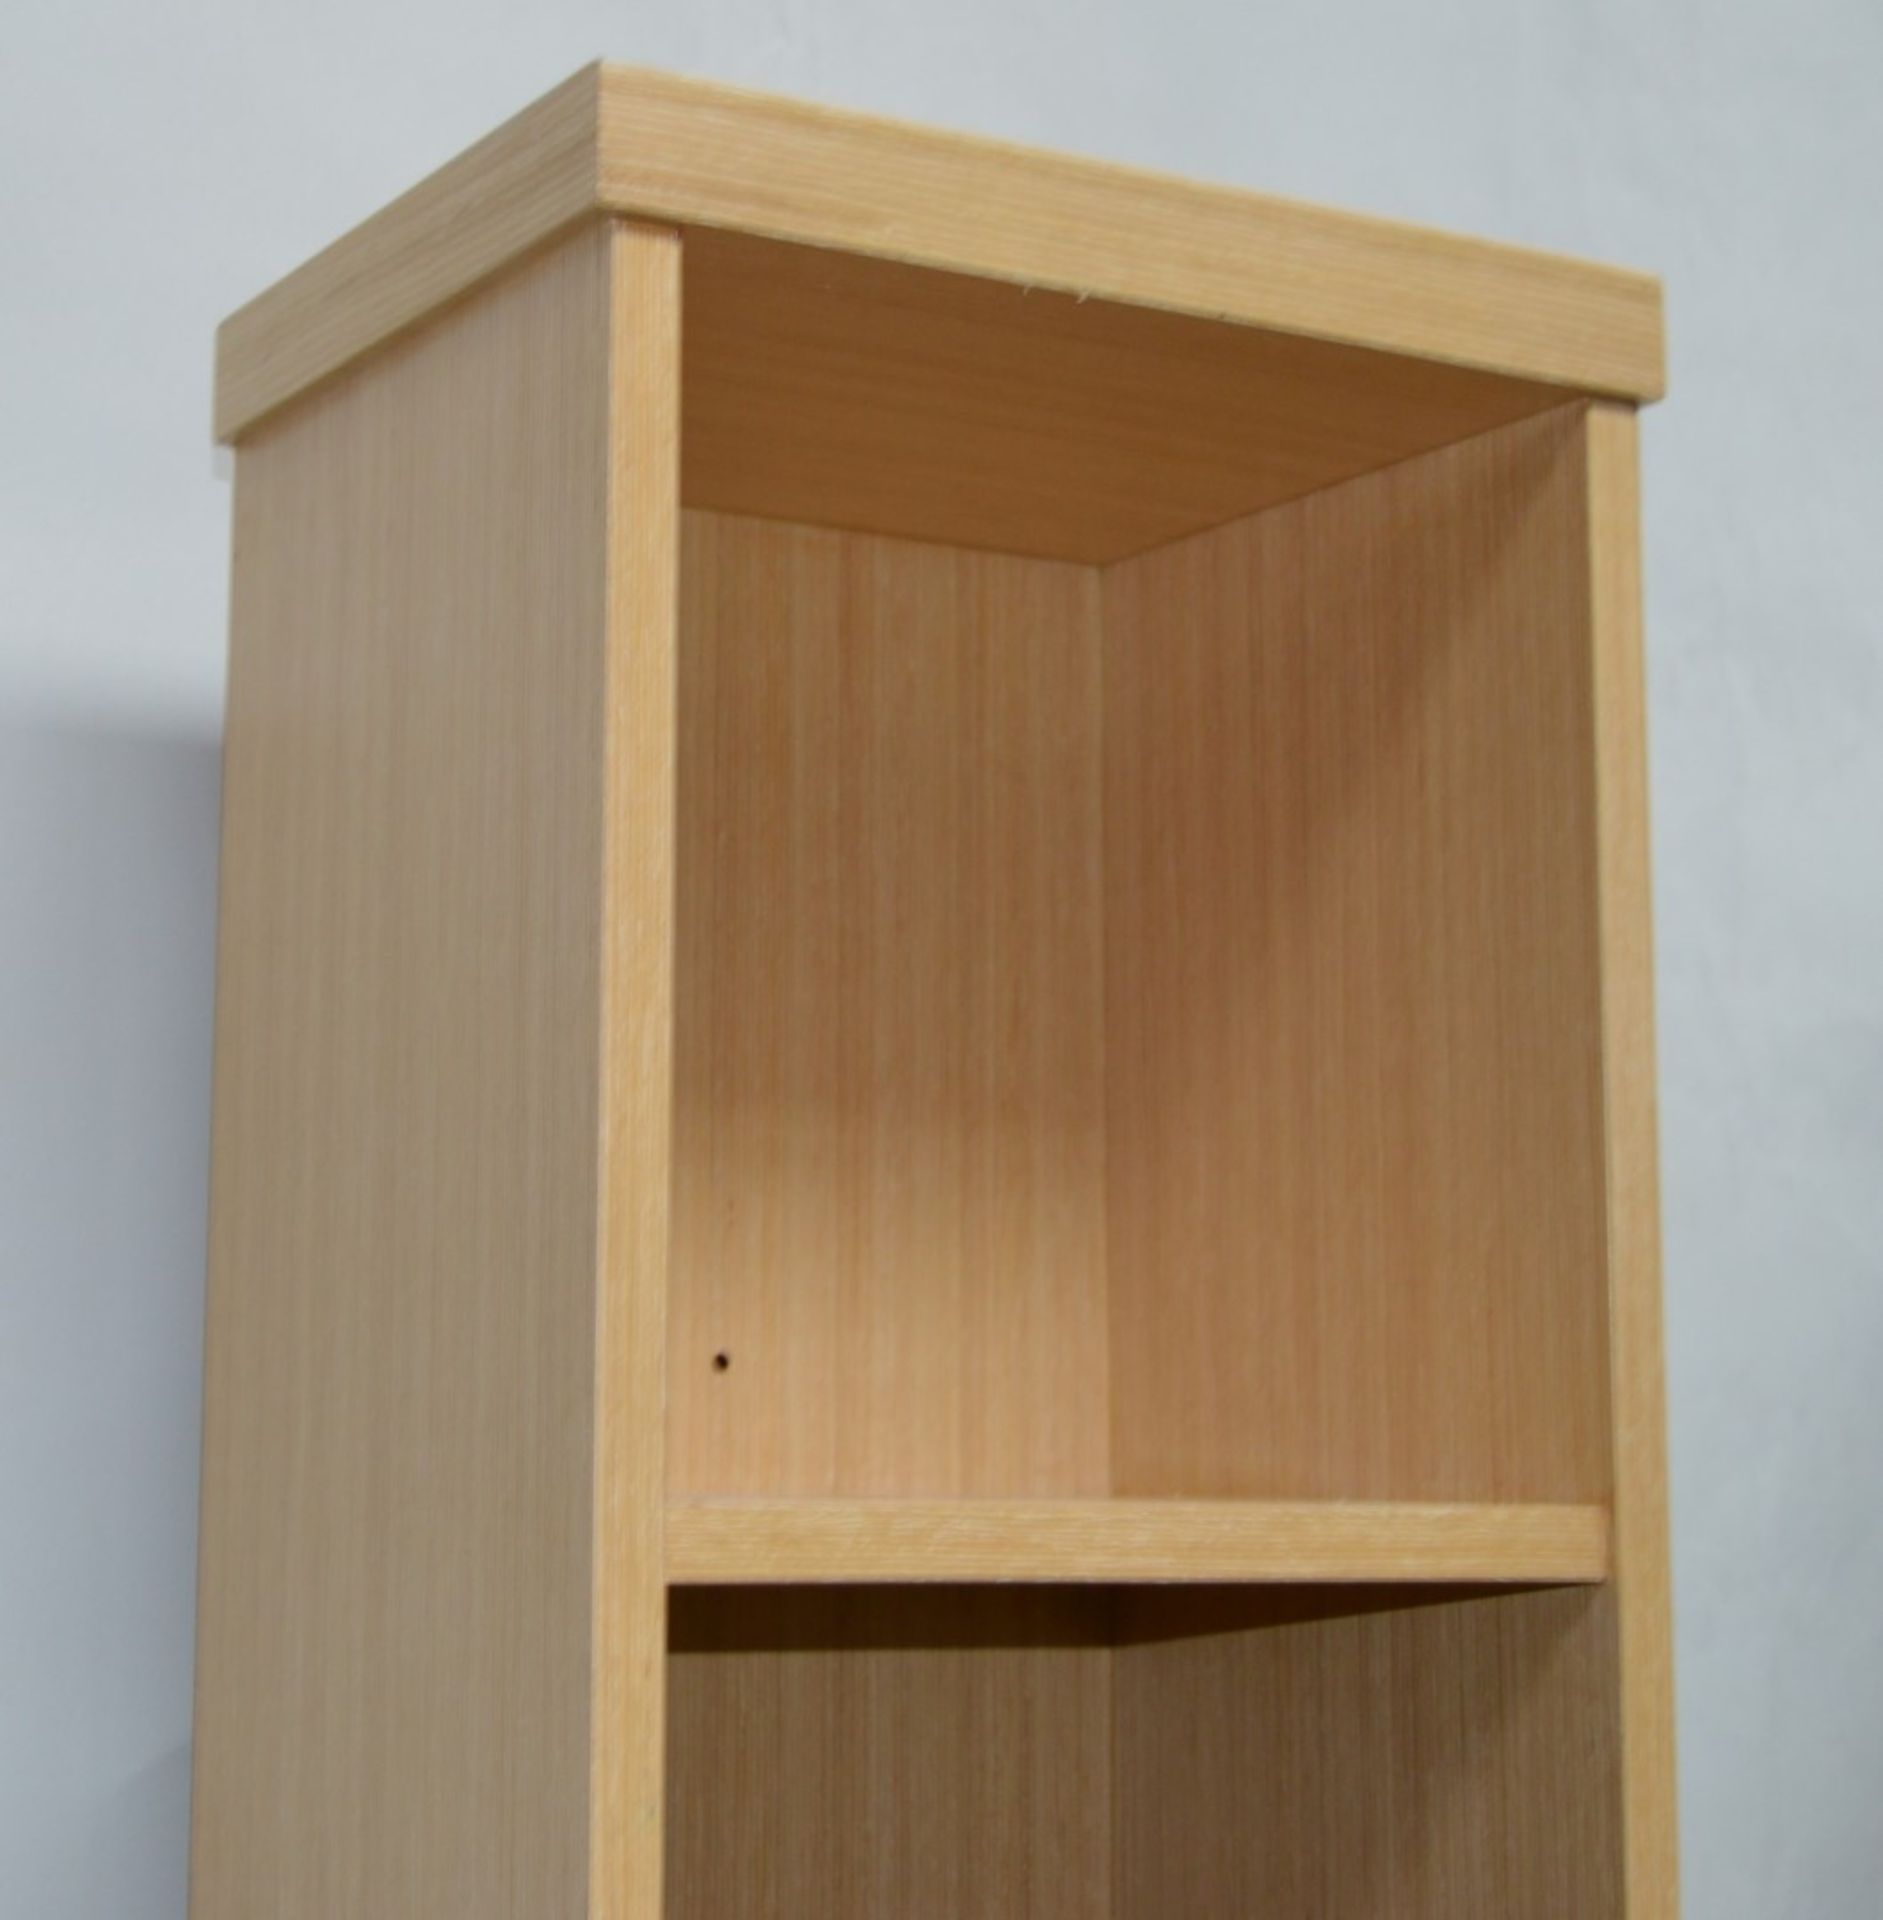 1 x Vogue ARC Series 2 Bathroom Storage Shelving Unit - Wall Mounted or Floor Standing - OAK - Image 2 of 9